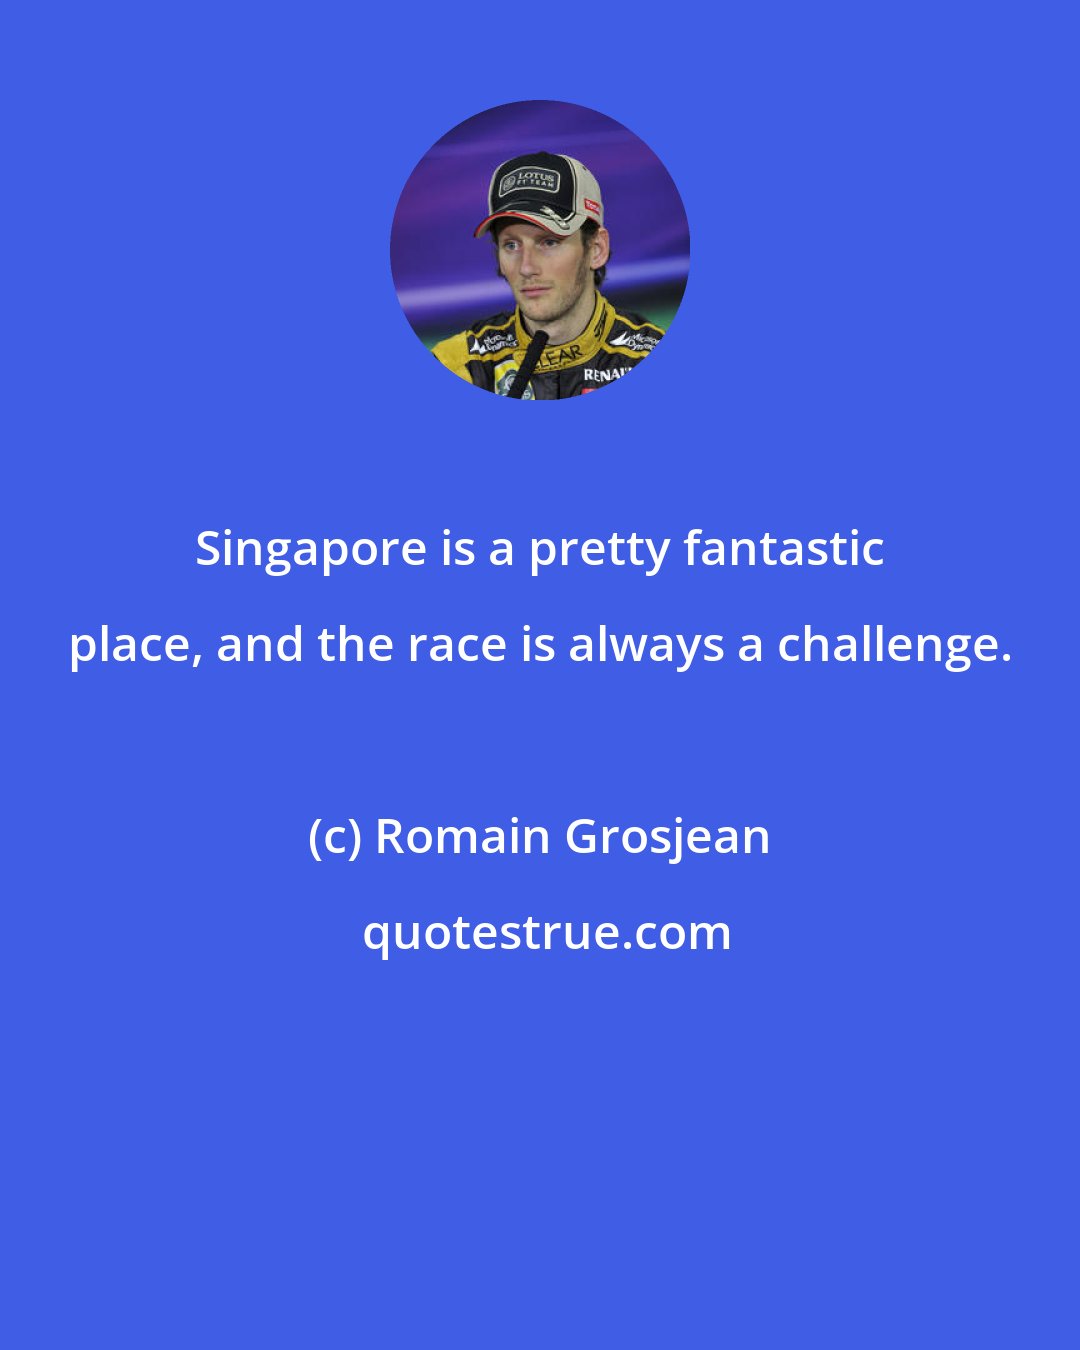 Romain Grosjean: Singapore is a pretty fantastic place, and the race is always a challenge.